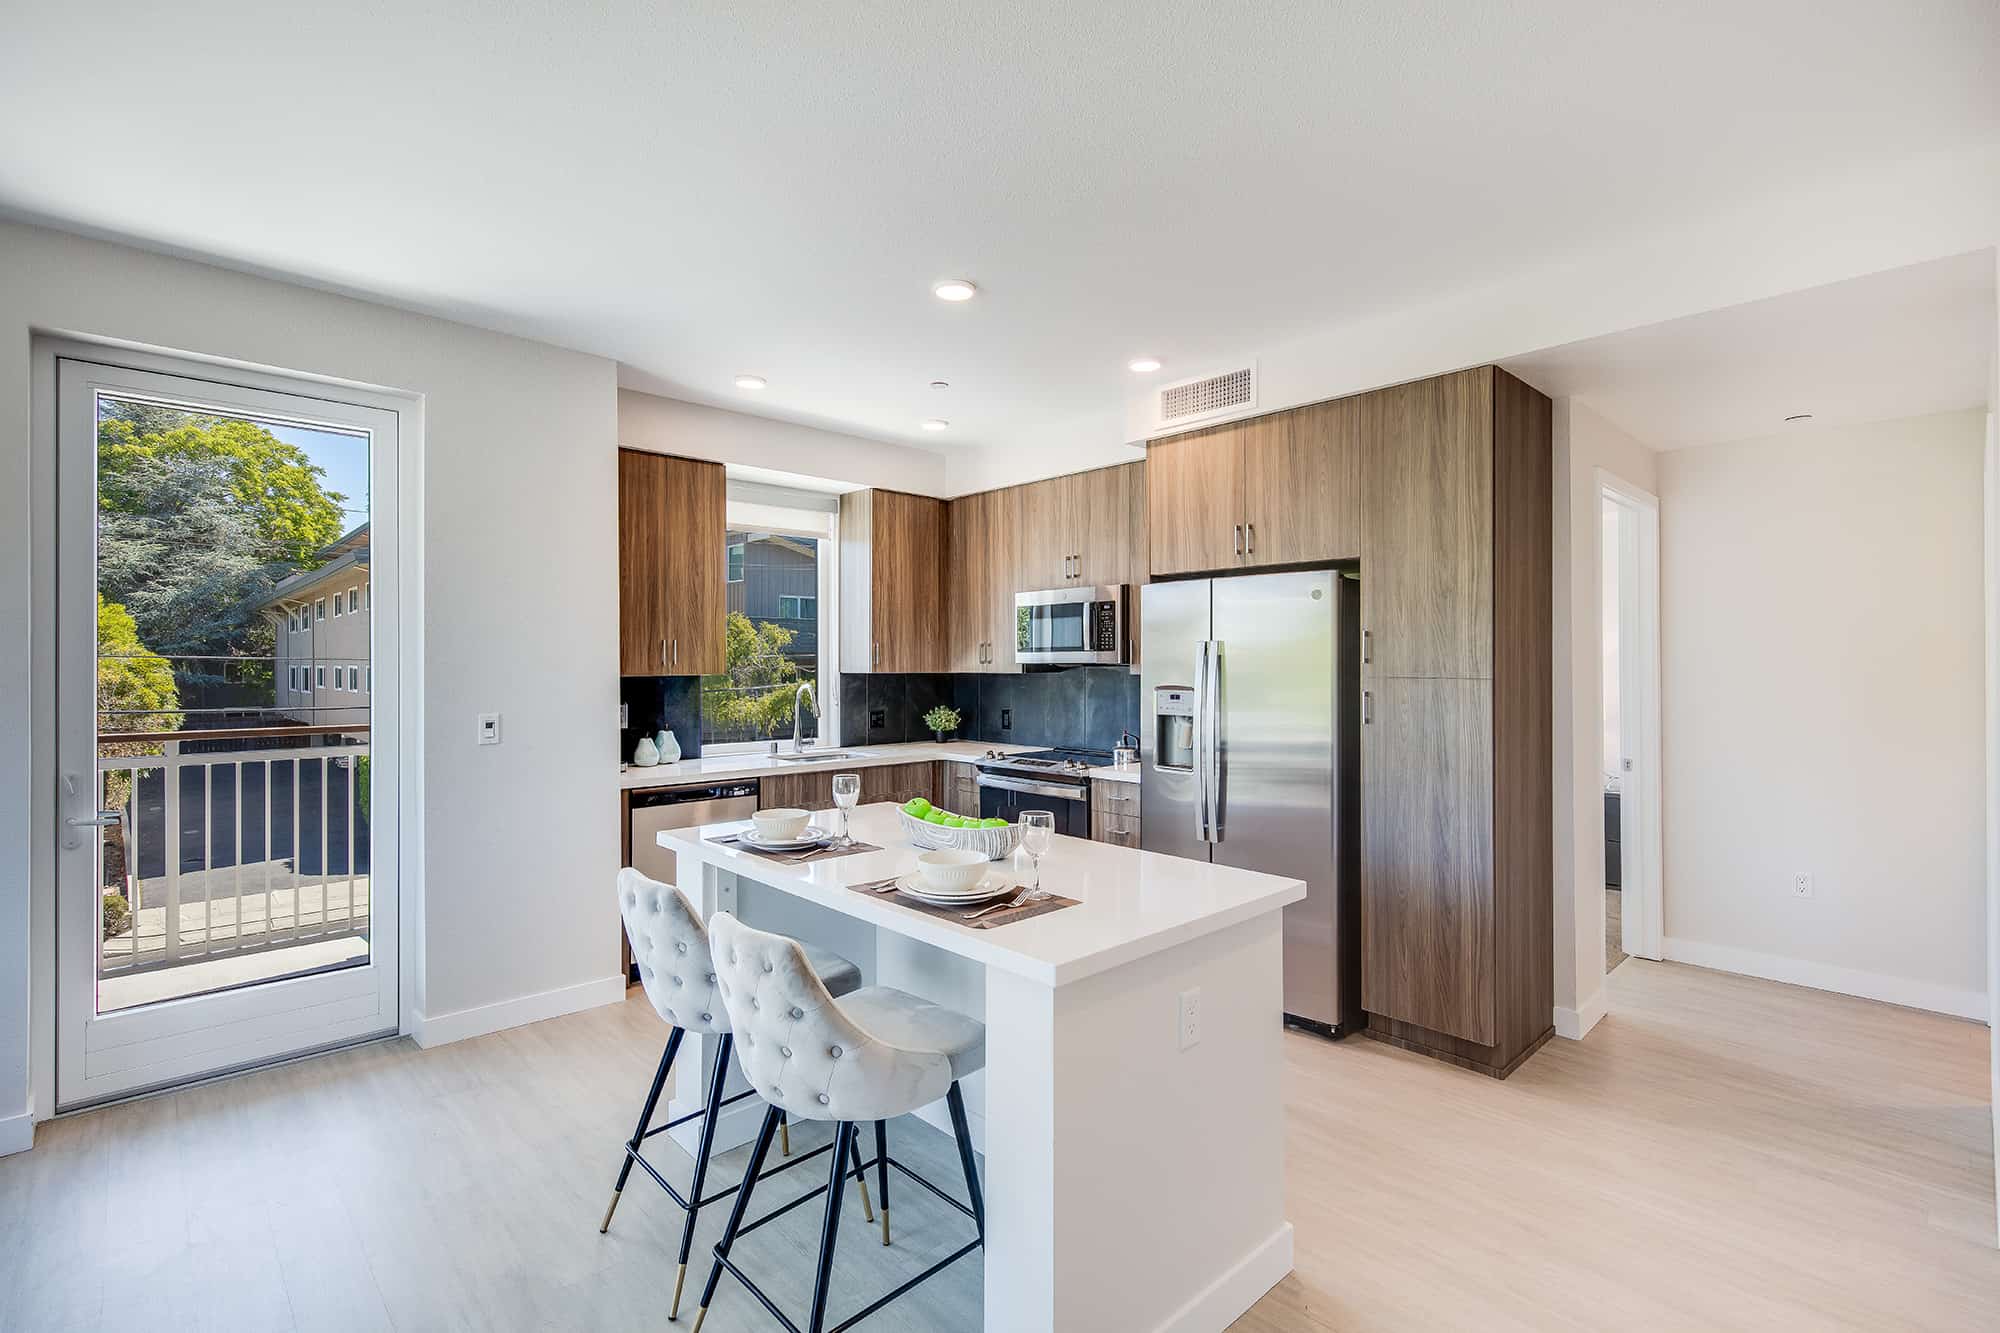 Luxury Apartments for Rent in Menlo Park - Realm - Modern Kitchen With Appliance Suite, Spacious Wooden Cabinets, and Nearby Dining Area